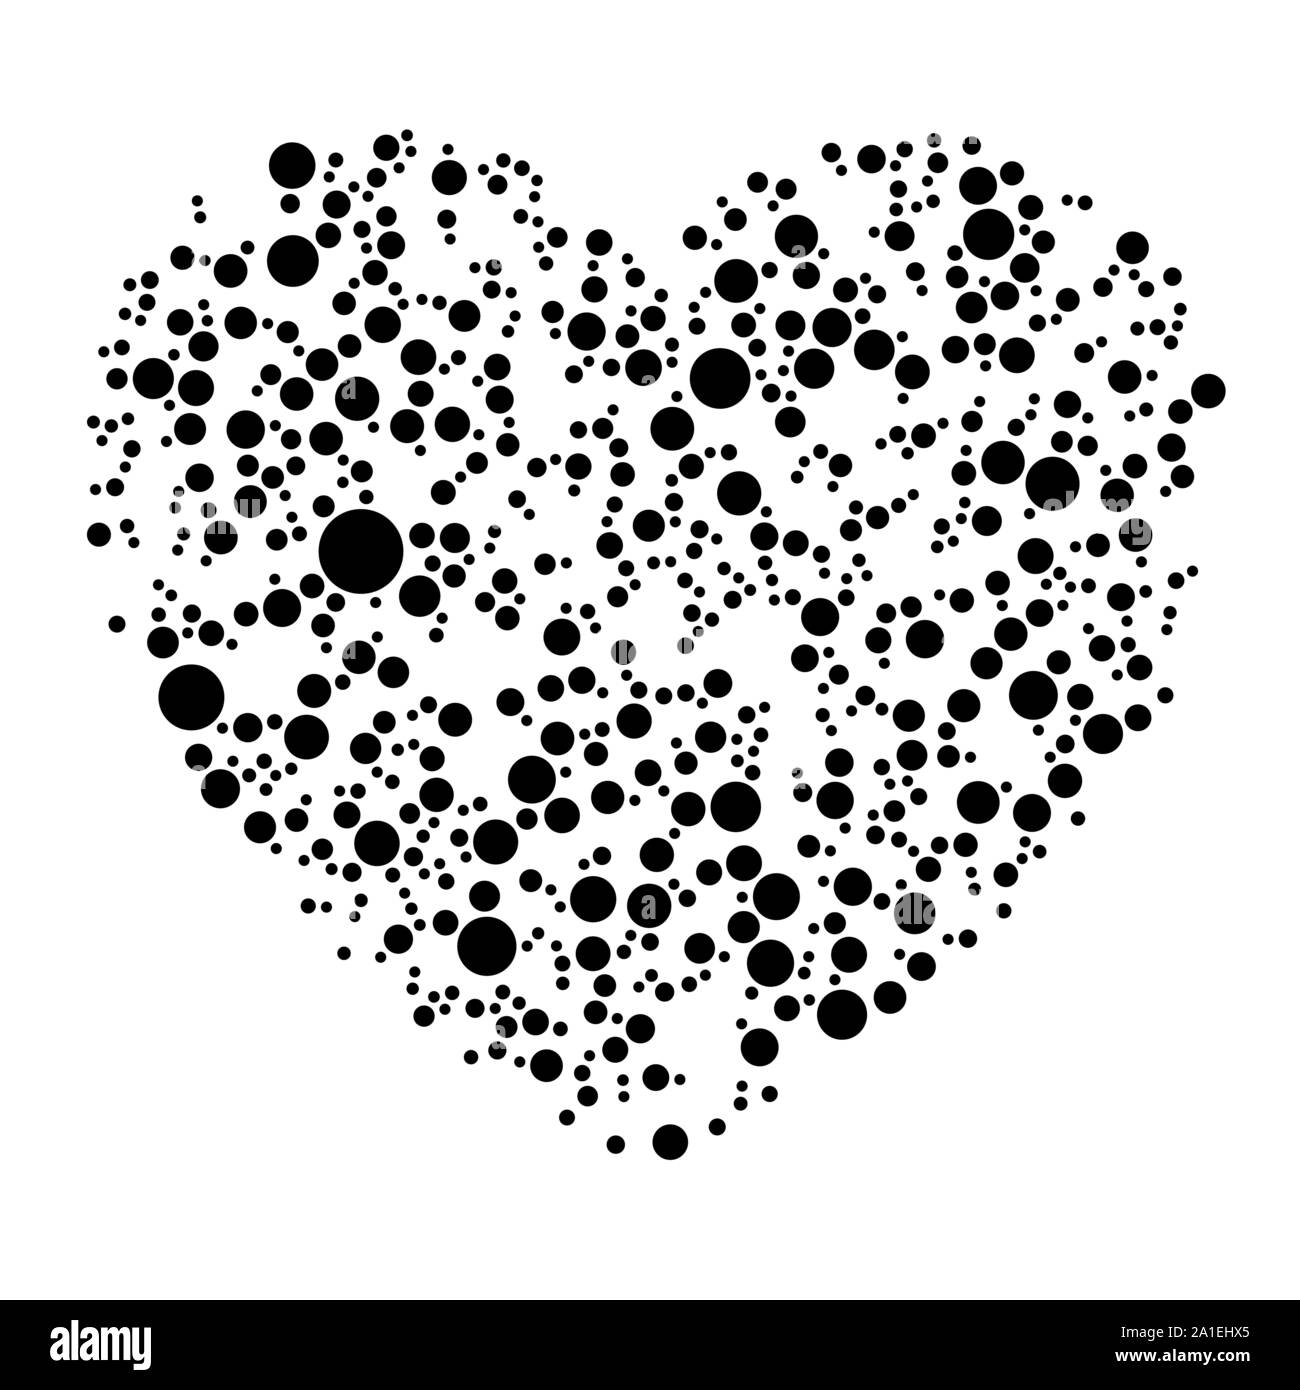 Unique heart element. Heart made of circles. Clip-art for love, affection, marriage heart health concepts Stock Vector